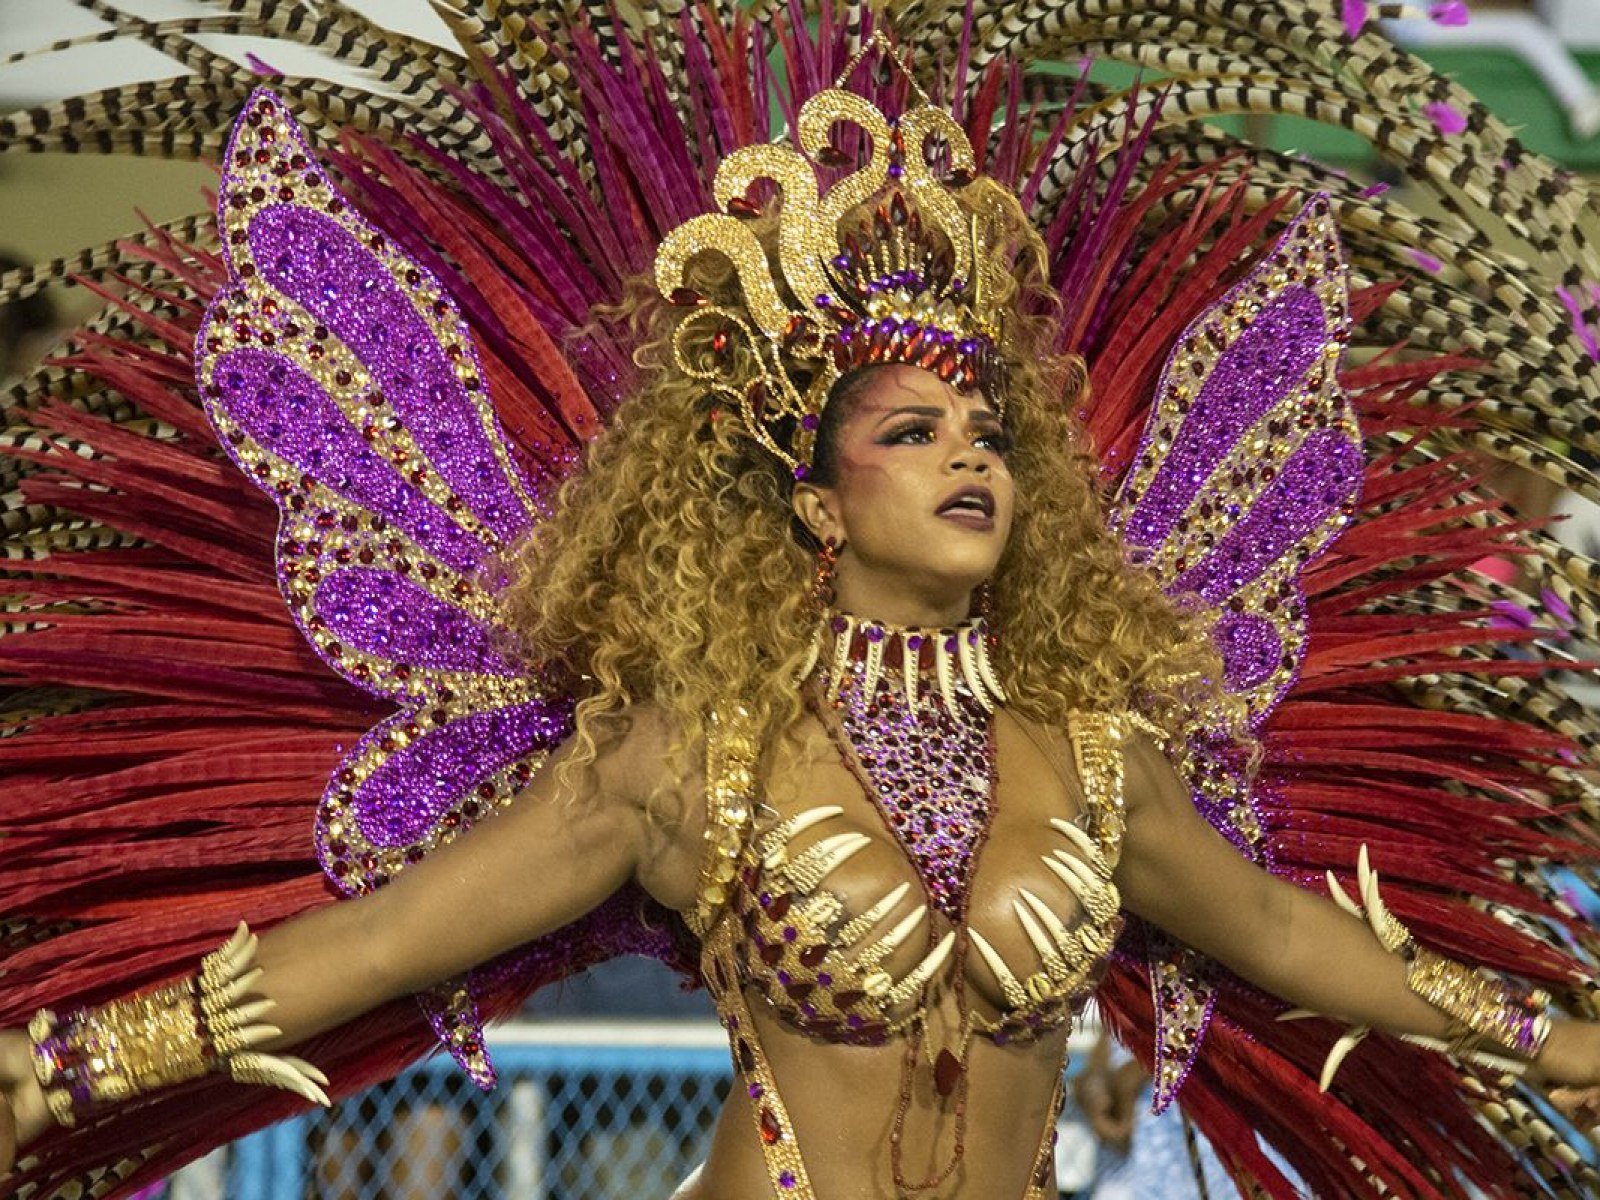 Rio de Janeiro Carnival 2019 Parades Part 2: Spectacular Photo of the Floats, Dancers and Costumes